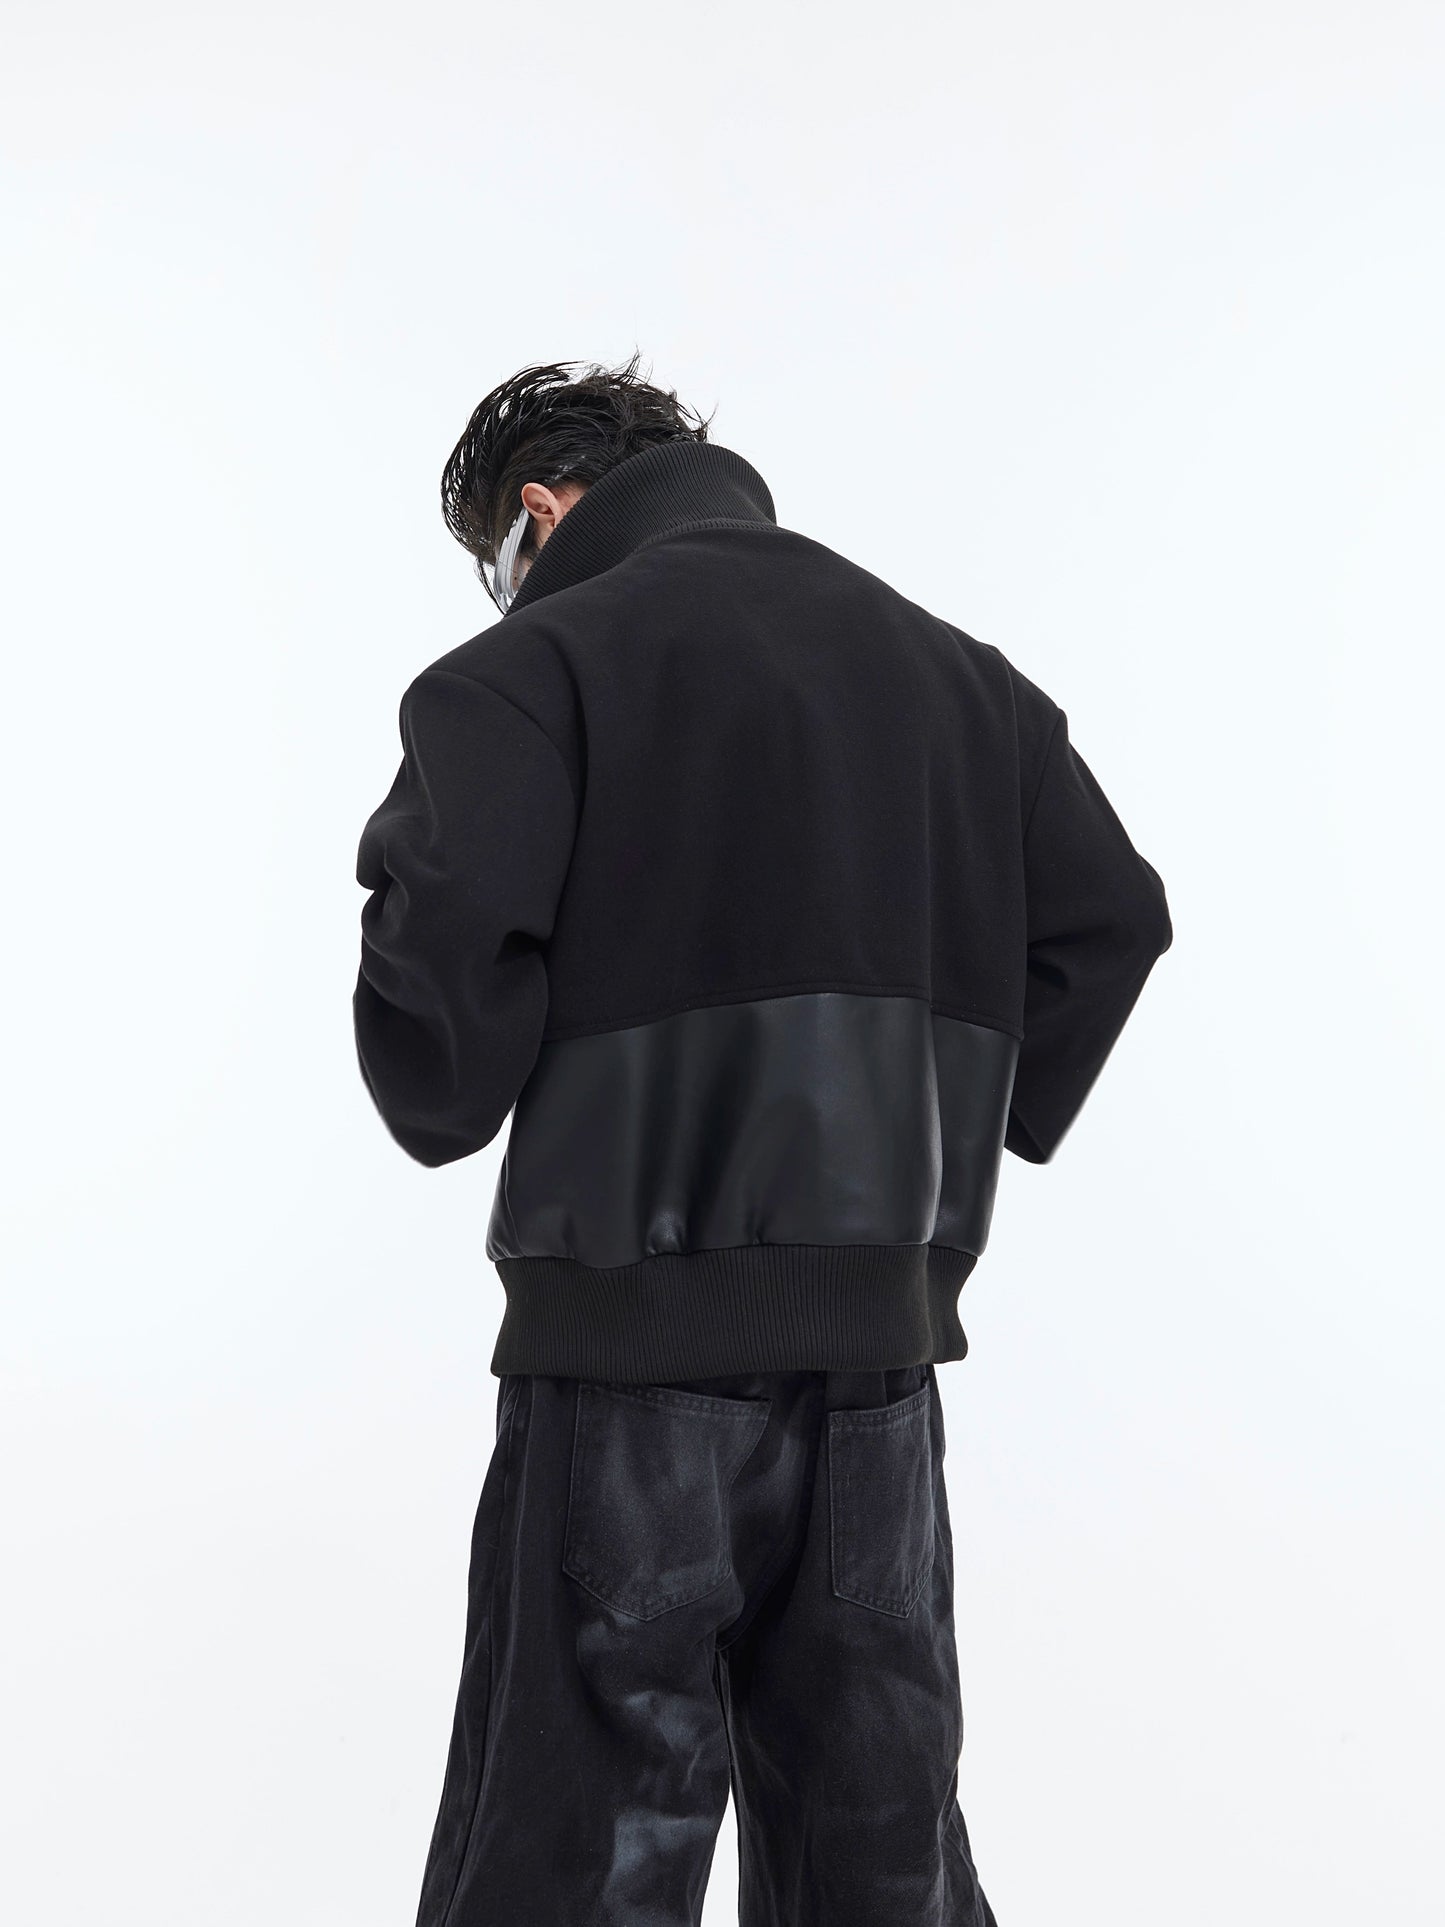 Cultur's E24ss niche deconstructed heterogeneous stand collar padded shoulders cropped jacket with a simple premium silhouette top